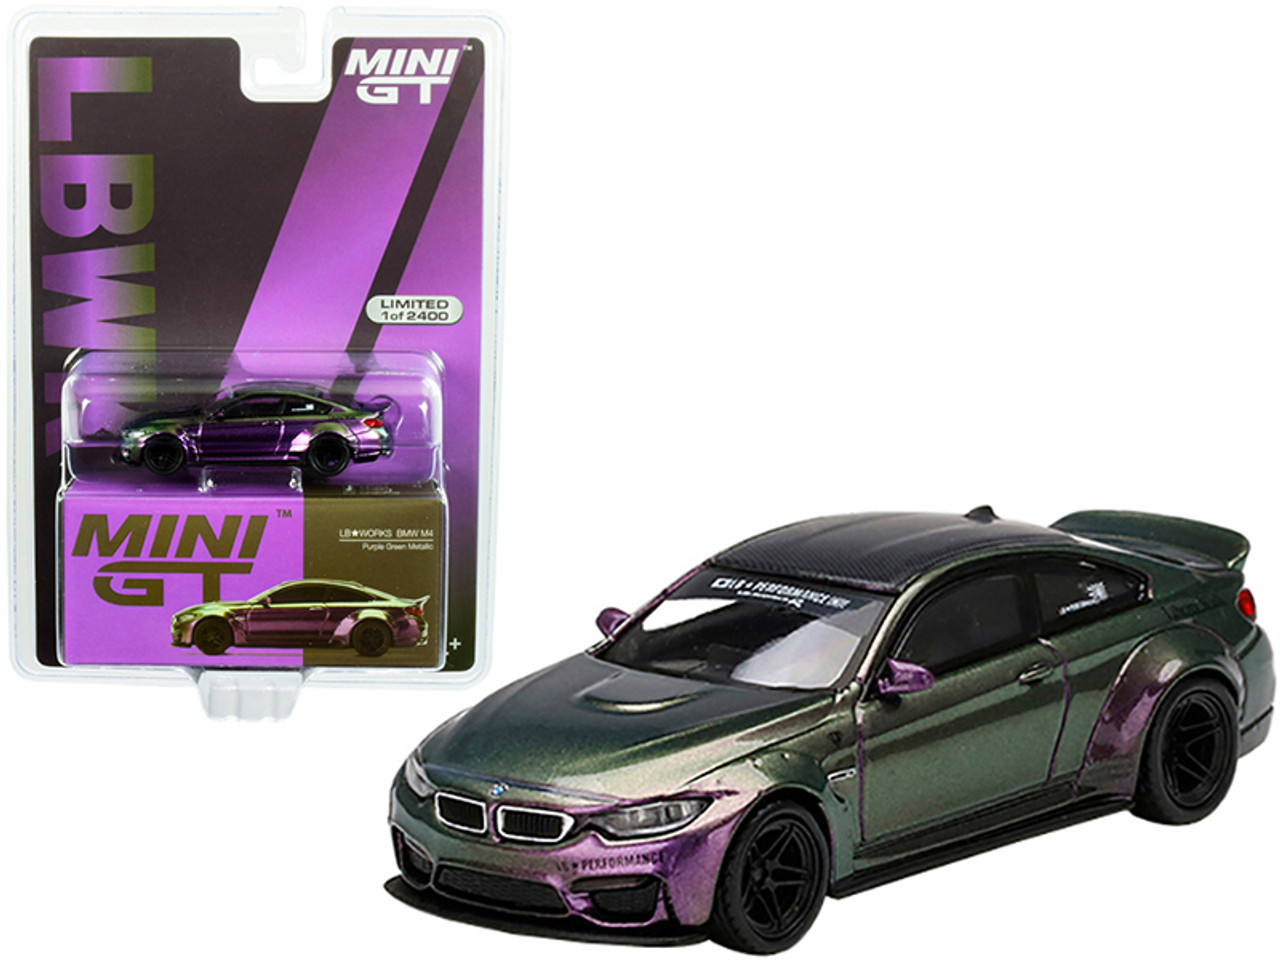 BMW M4 LB Works Purple Green Metallic with Carbon Top Limited Edition to 2400 pieces Worldwide 1/64 Diecast Model Car by True Scale Miniatures